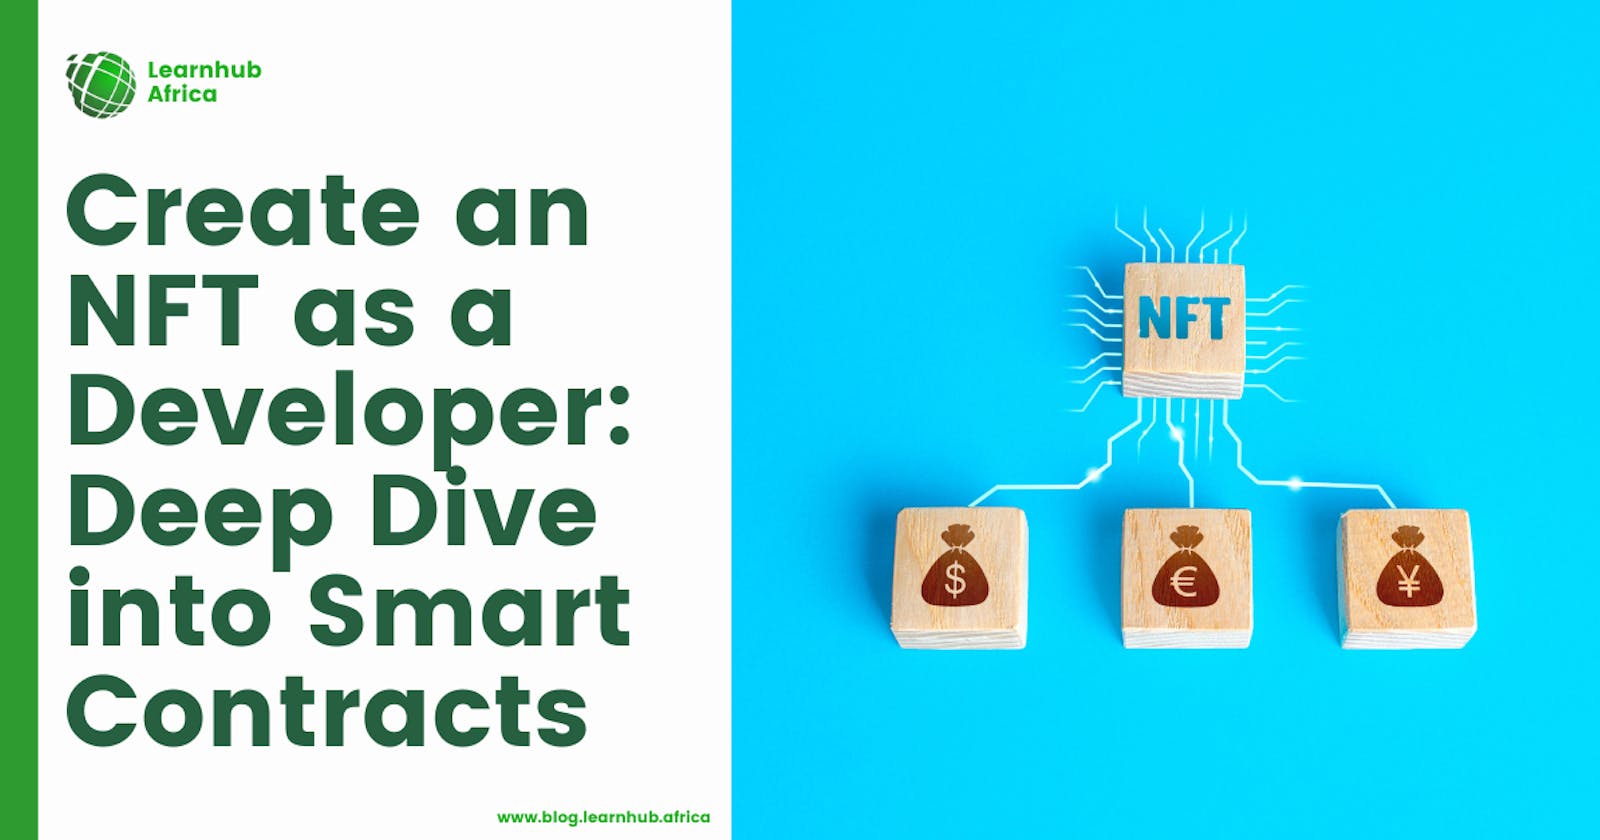 Create an NFT as a Developer: Deep Dive into Smart Contracts